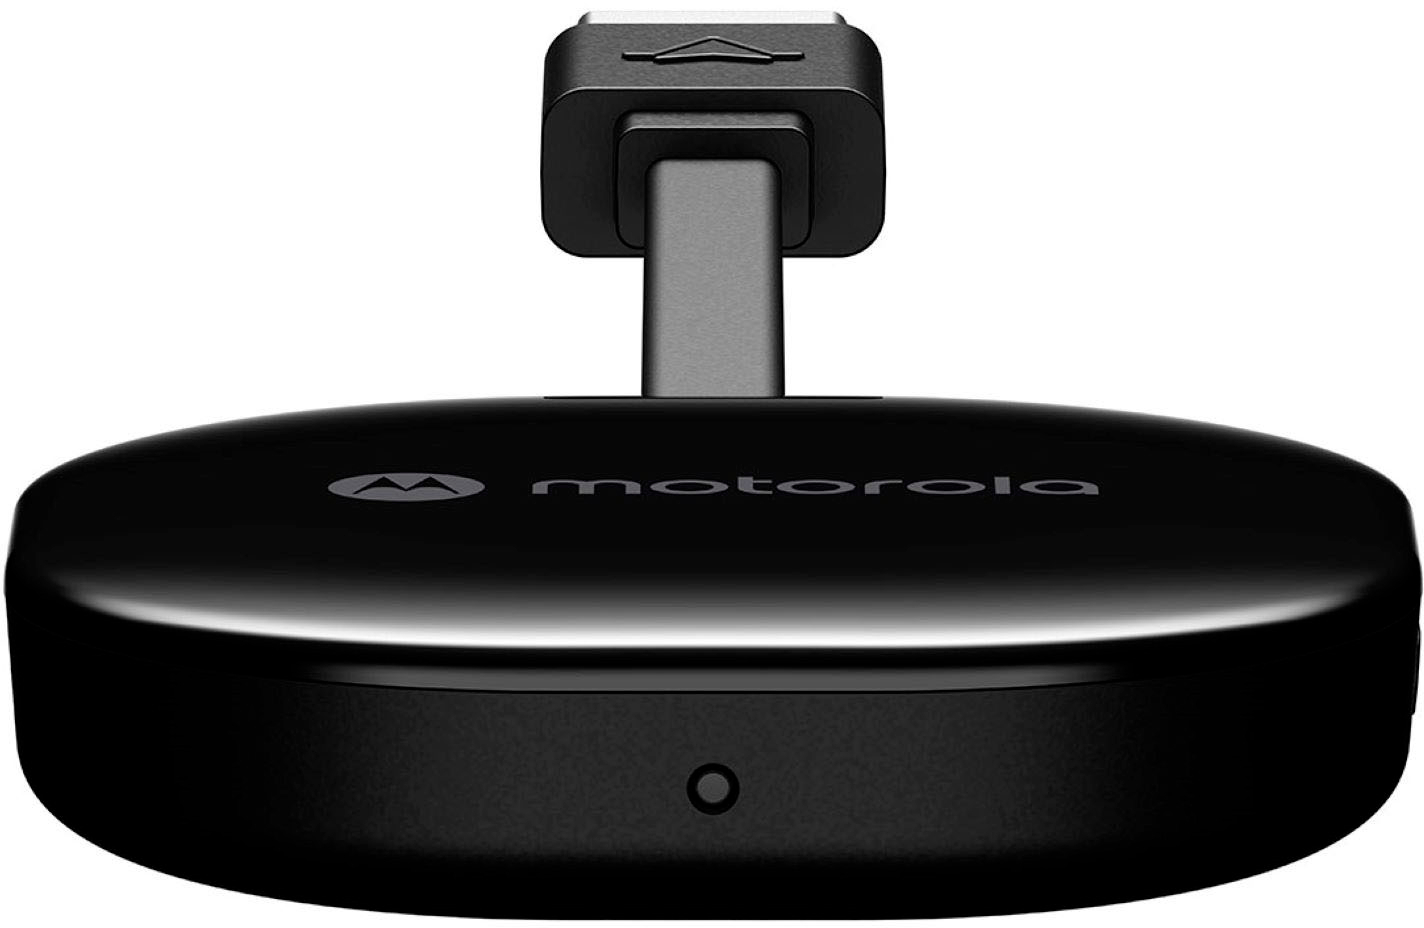 Motorola's popular wireless Android Auto adapter is now just $70 in this  limited-time deal